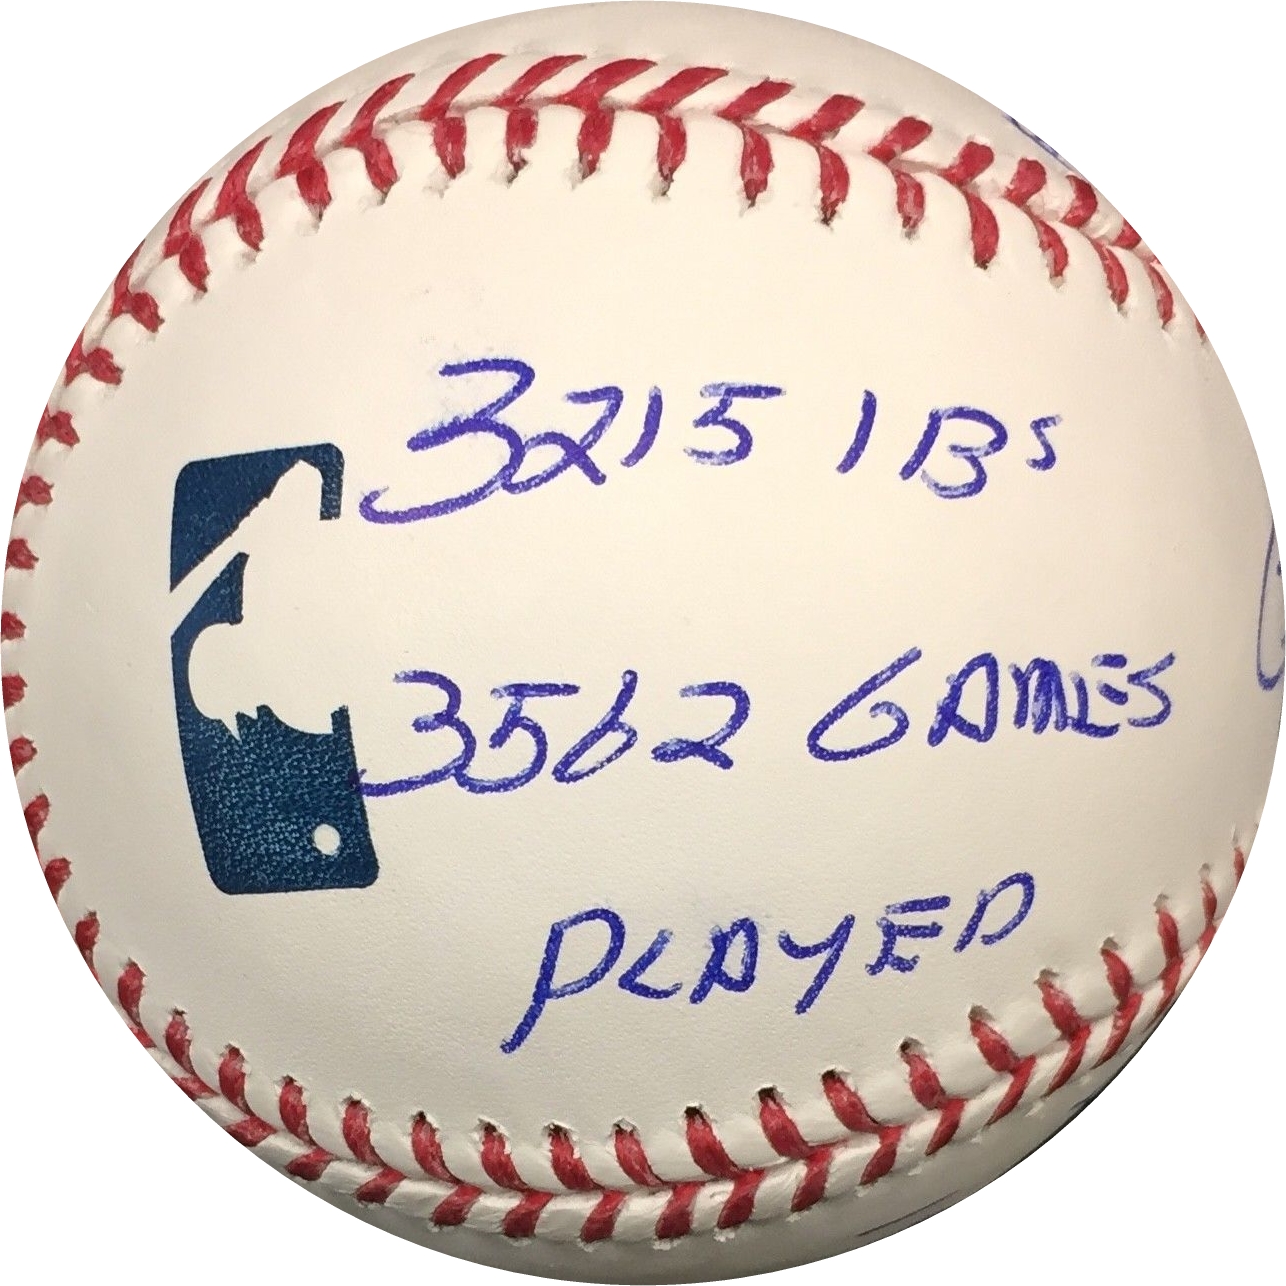 Pete Rose Autographed Baseball MLB RECORDS OMLB Pete Rose Authentication – Official ...1286 x 1286